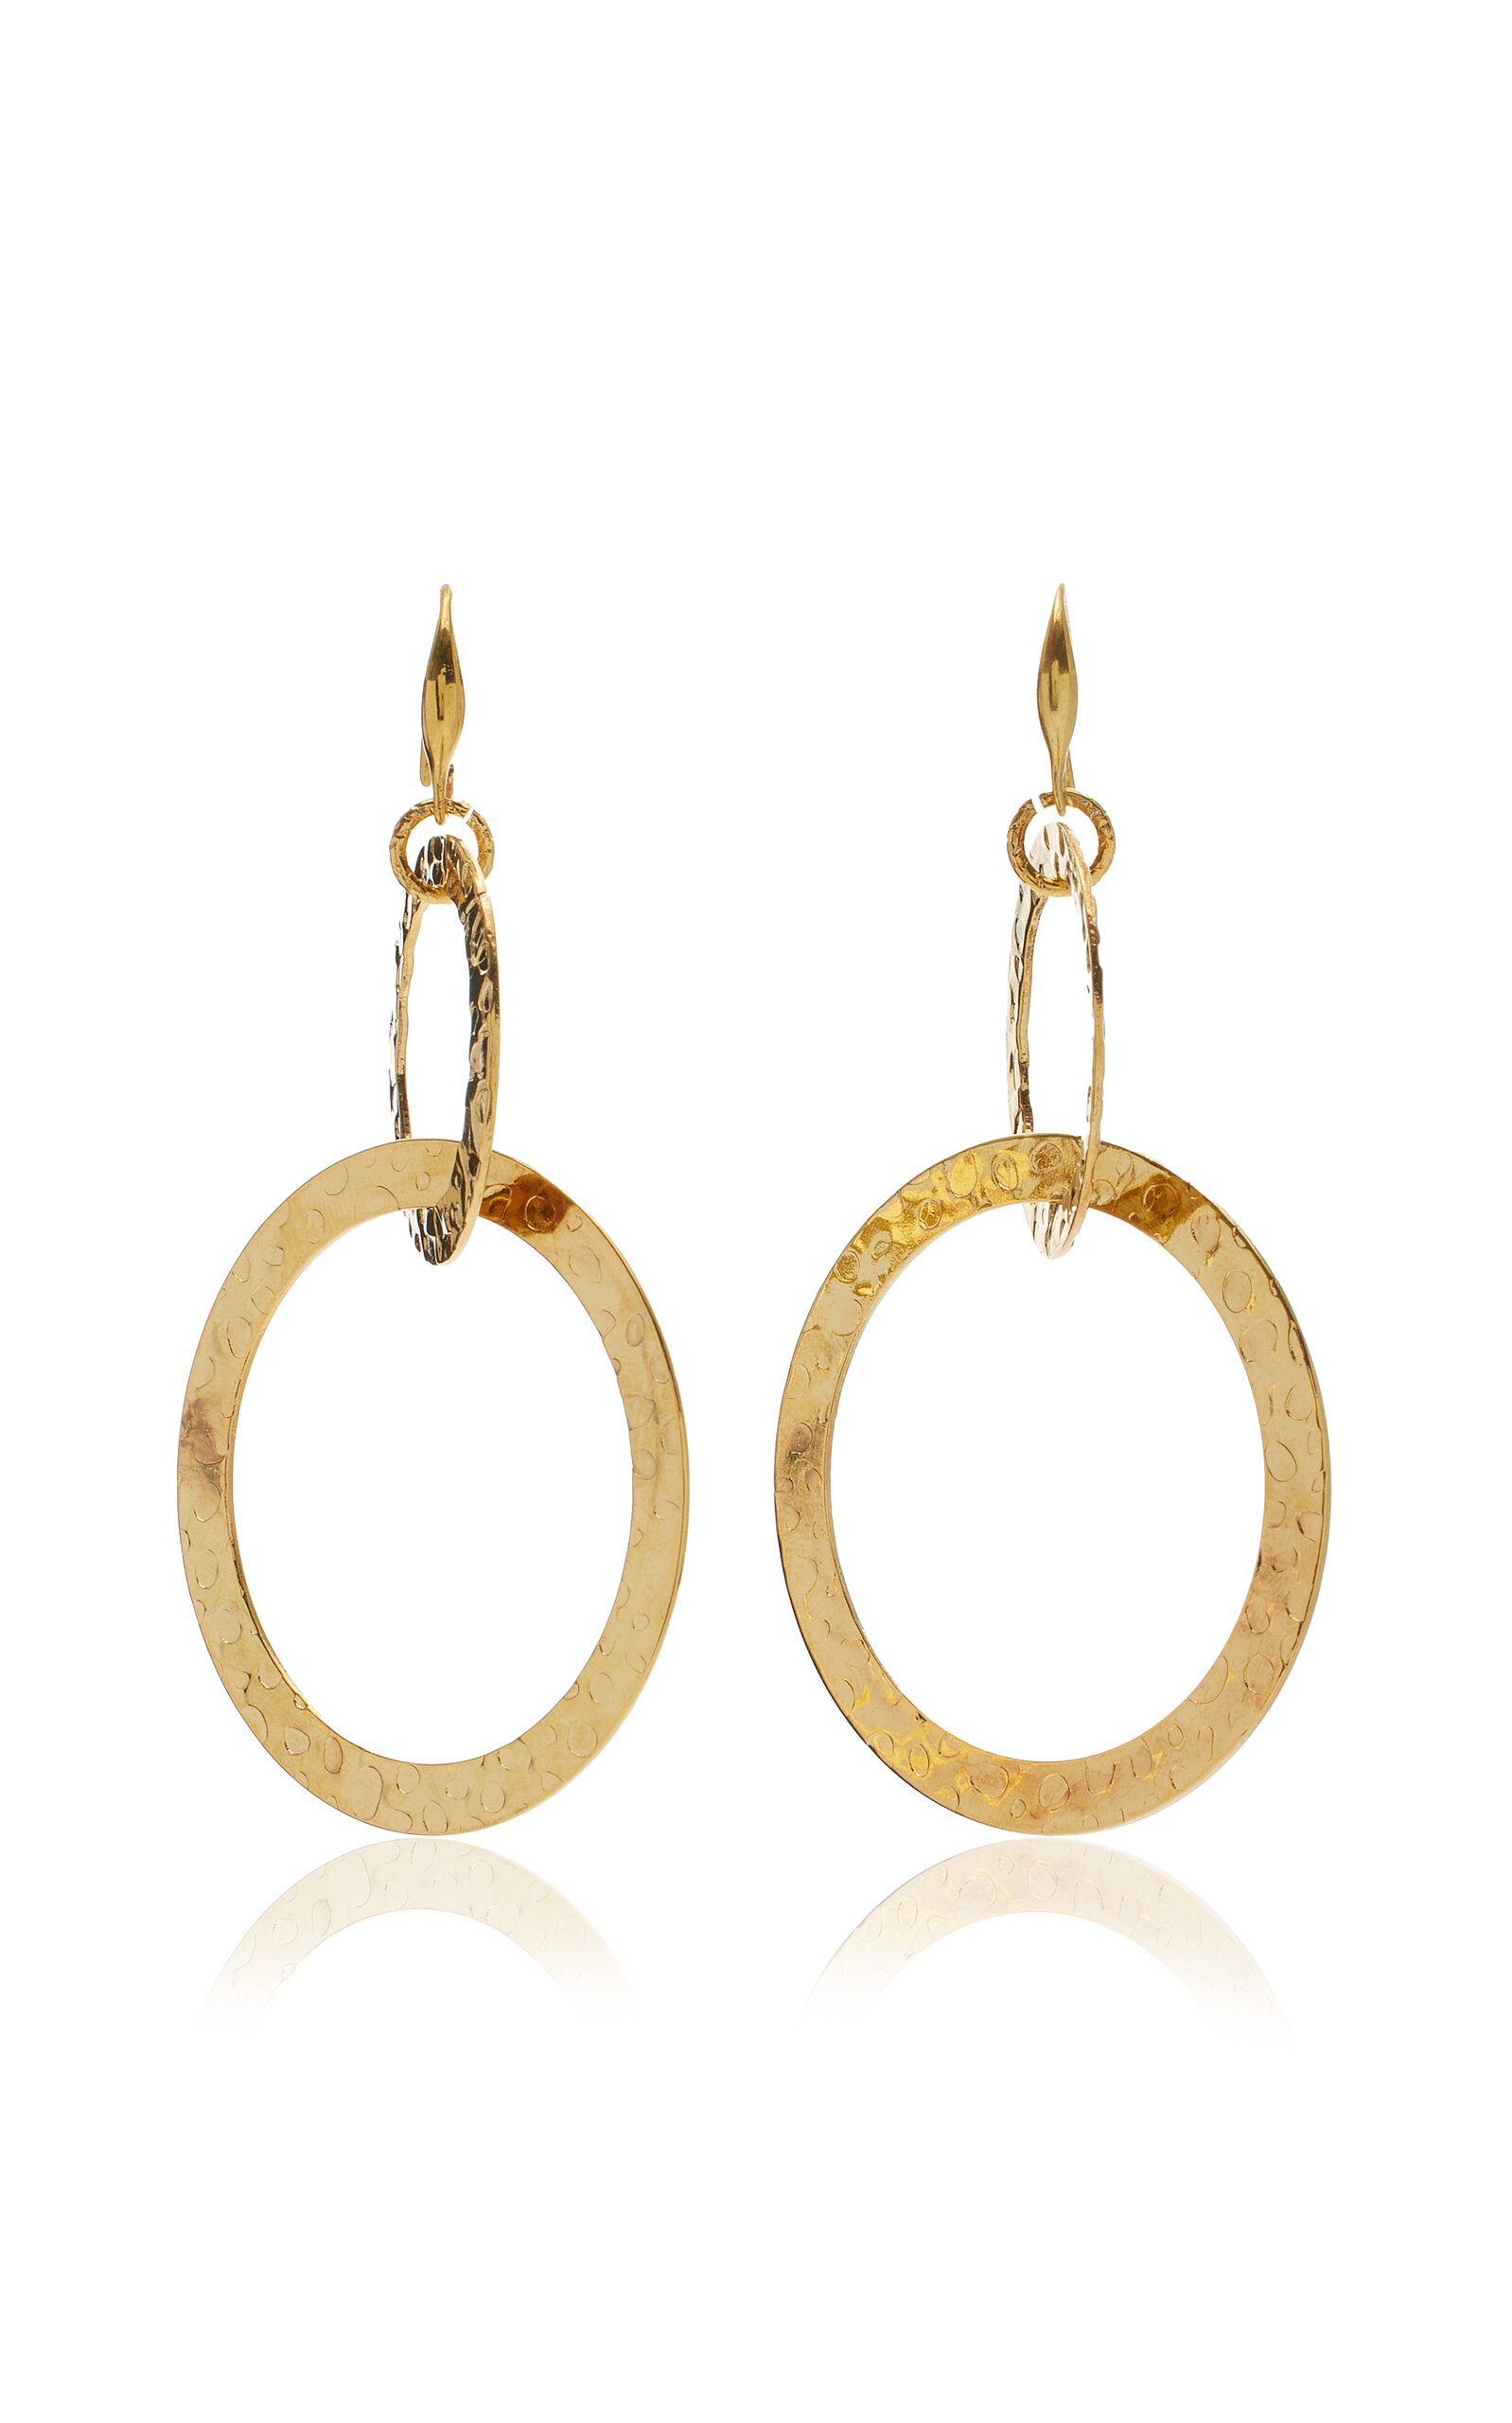 Saturn 22K Gold-Plated Earrings